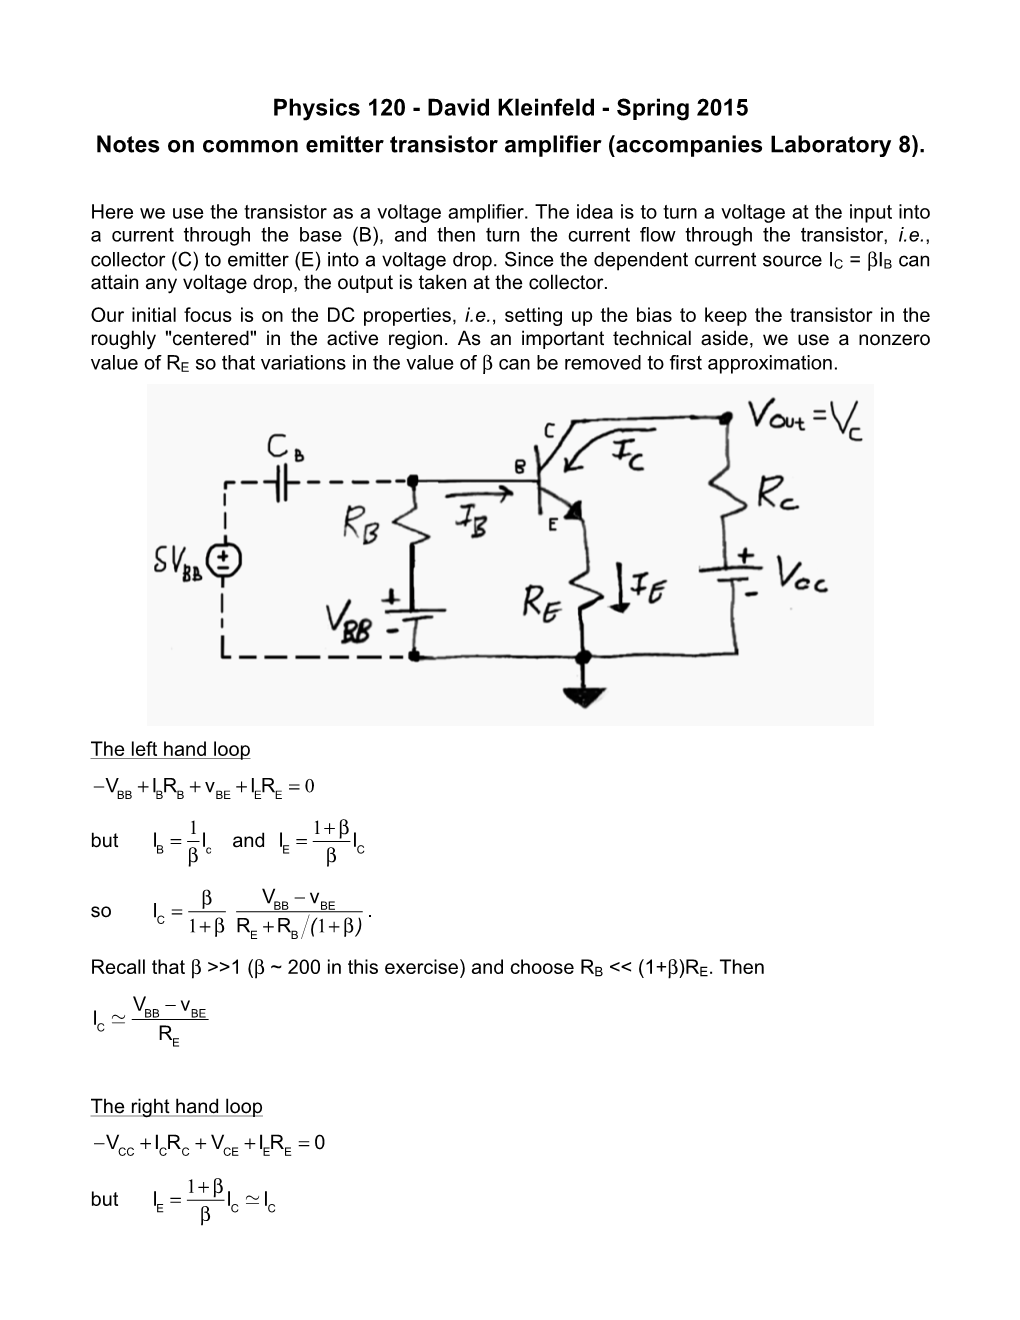 Notes on Common Emitter Transistor Amplifier for Laboratory 8